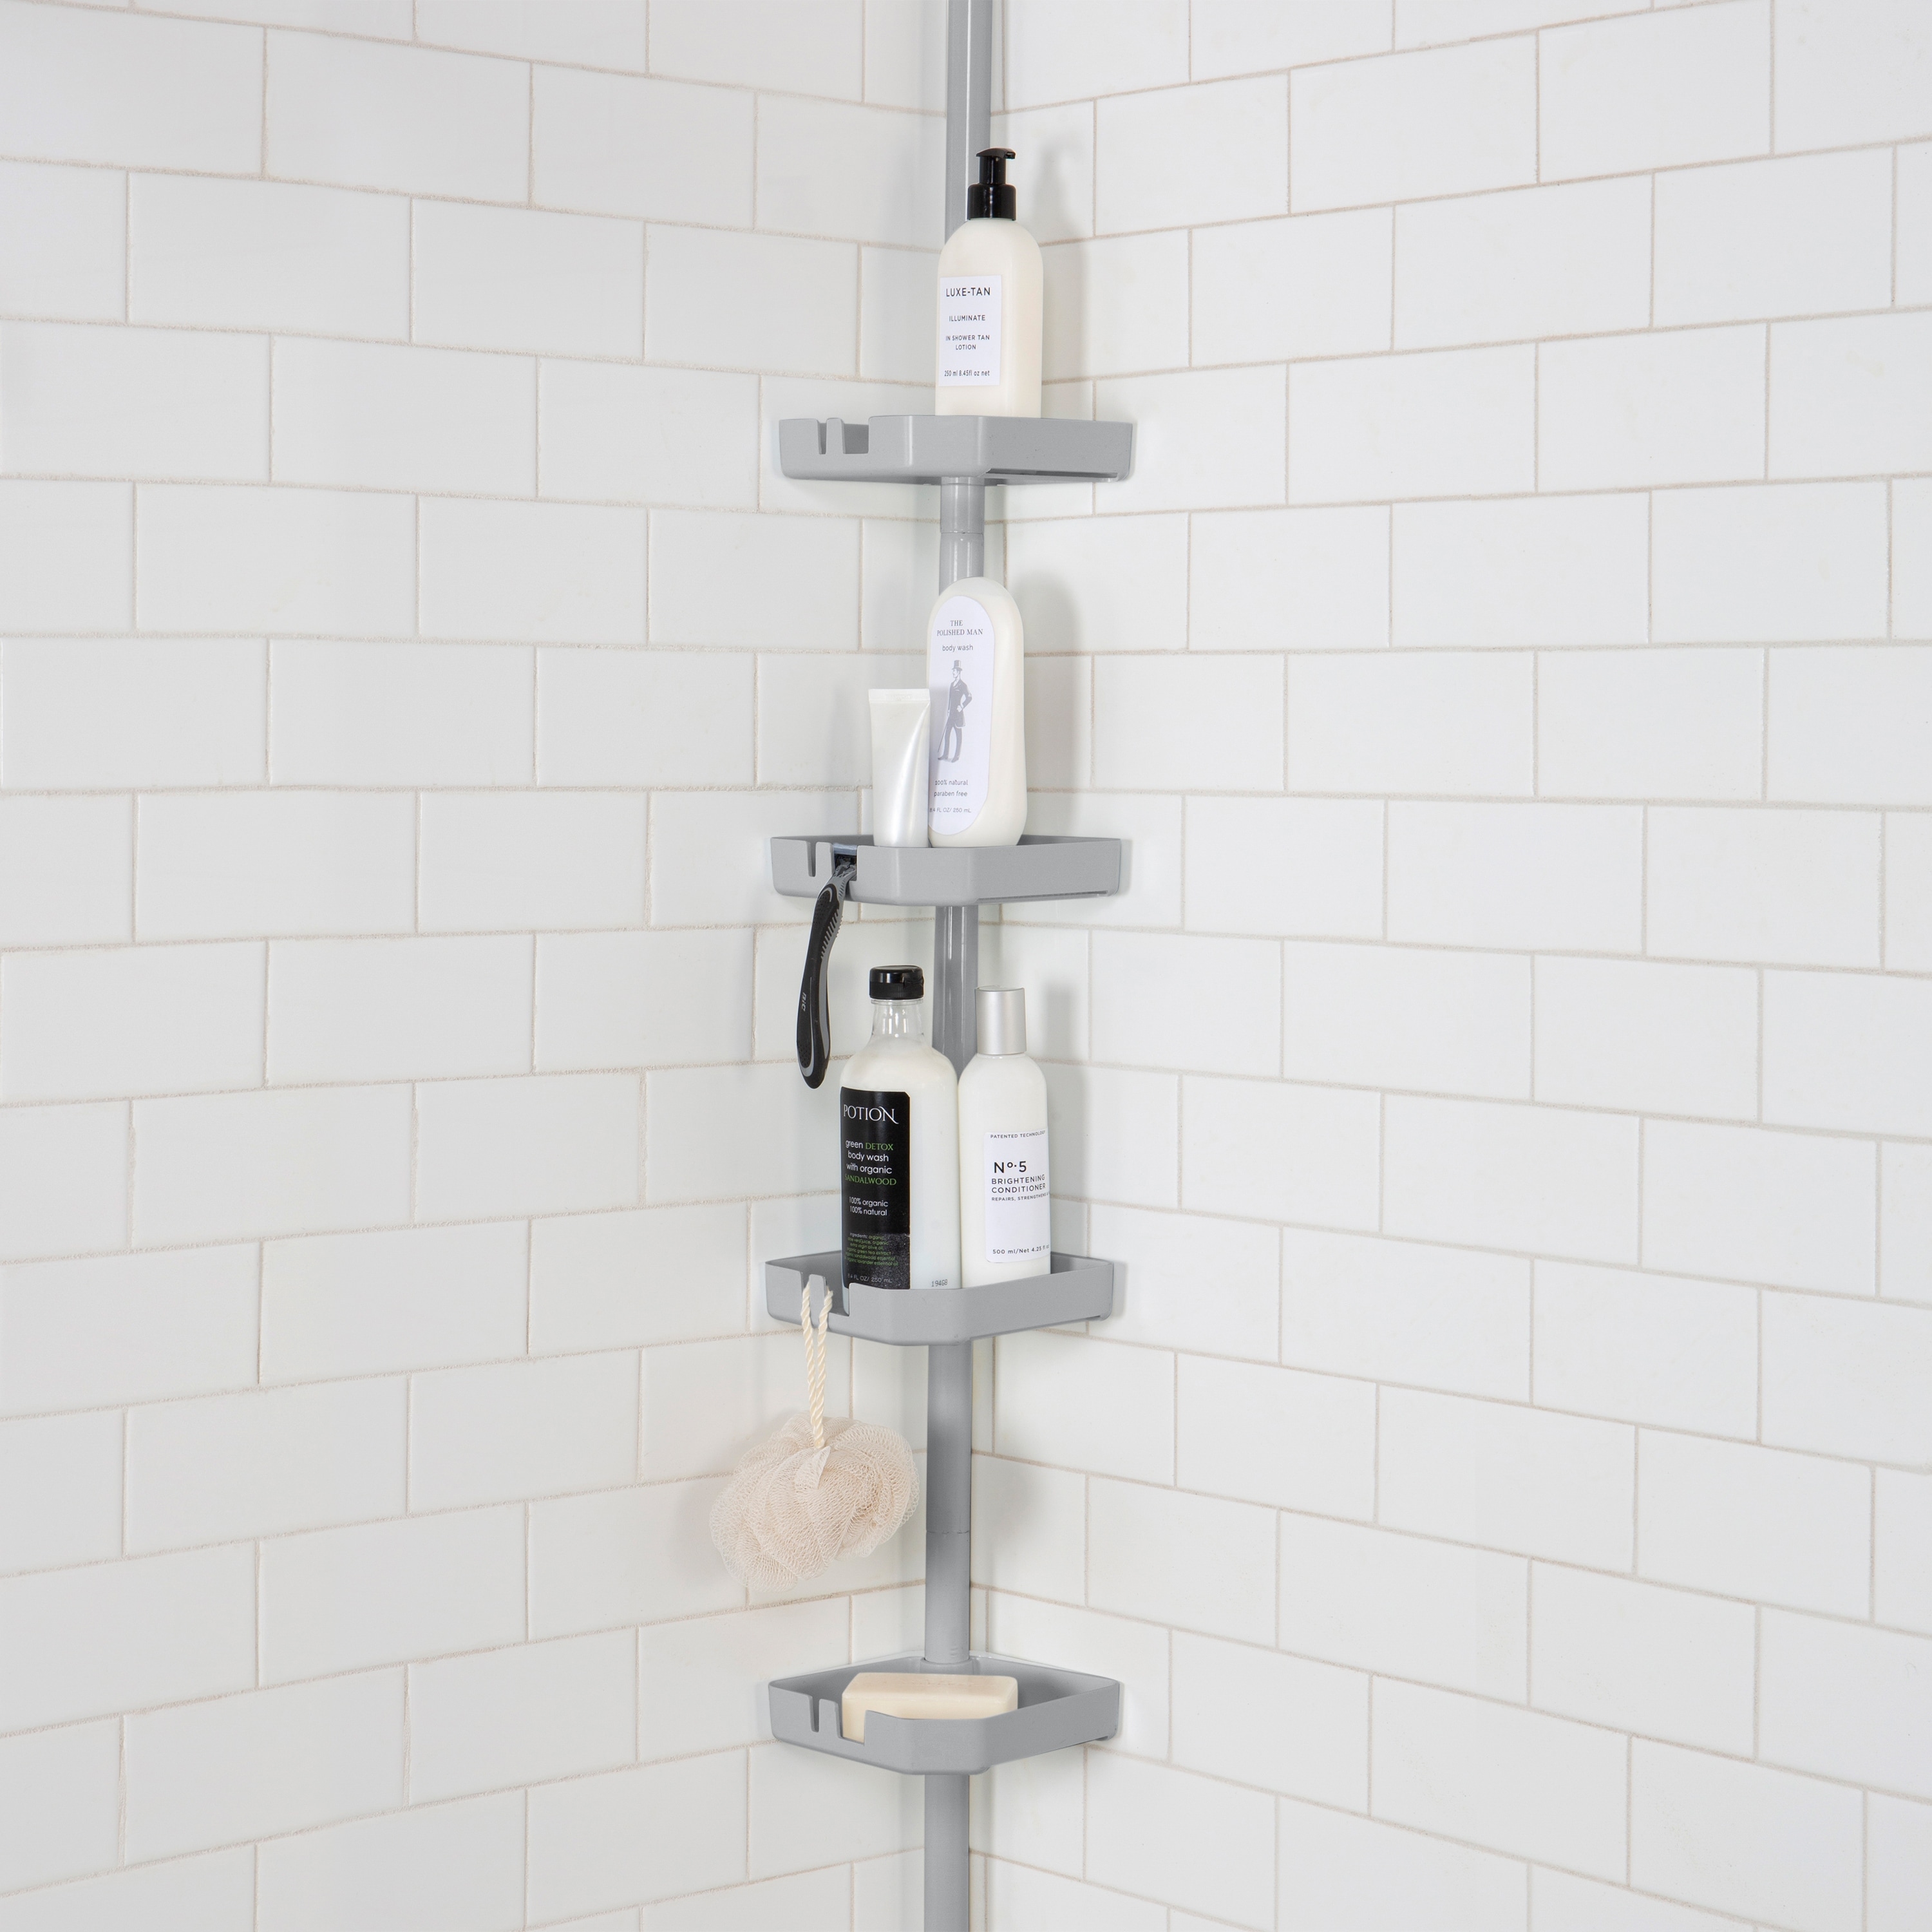 https://ak1.ostkcdn.com/images/products/is/images/direct/09ac10e75bf8eb007c7a2c375050c317bcc839b6/Bath-Bliss-4-Tier-Tension-Corner-Shower-Organizer-Caddy-in-Grey.jpg